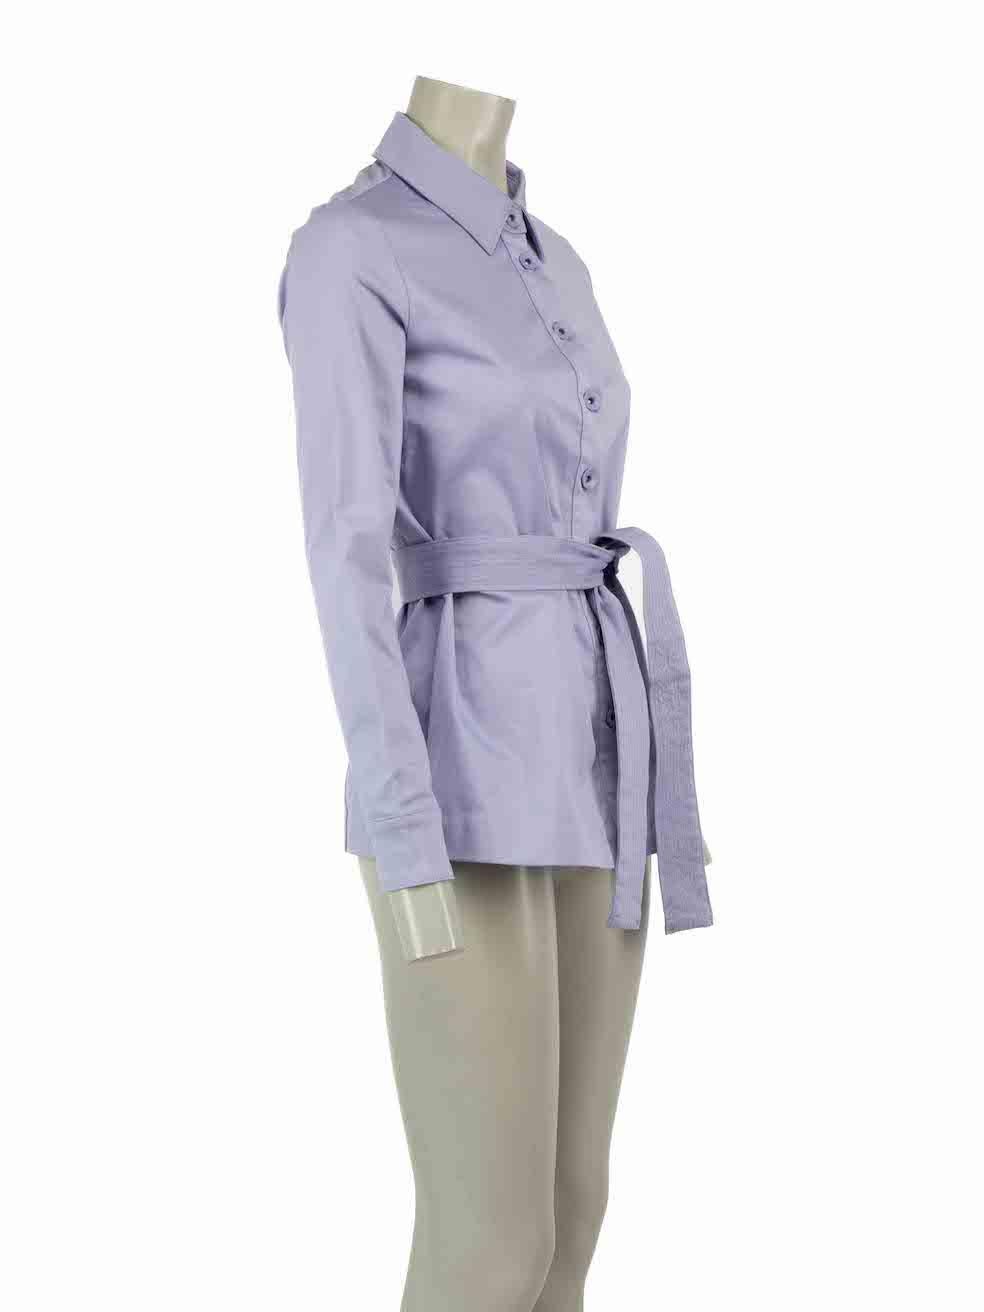 CONDITION is Never worn, with tags. No visible wear to jacket is evident on this new STAUD designer resale item.
 
 Details
 Lilac
 Cotton
 Shirt jacket
 Button up fastening
 Belted
 
 
 Made in Los Angeles
 
 Composition
 97.5% Cotton, 2.5% Lycra
